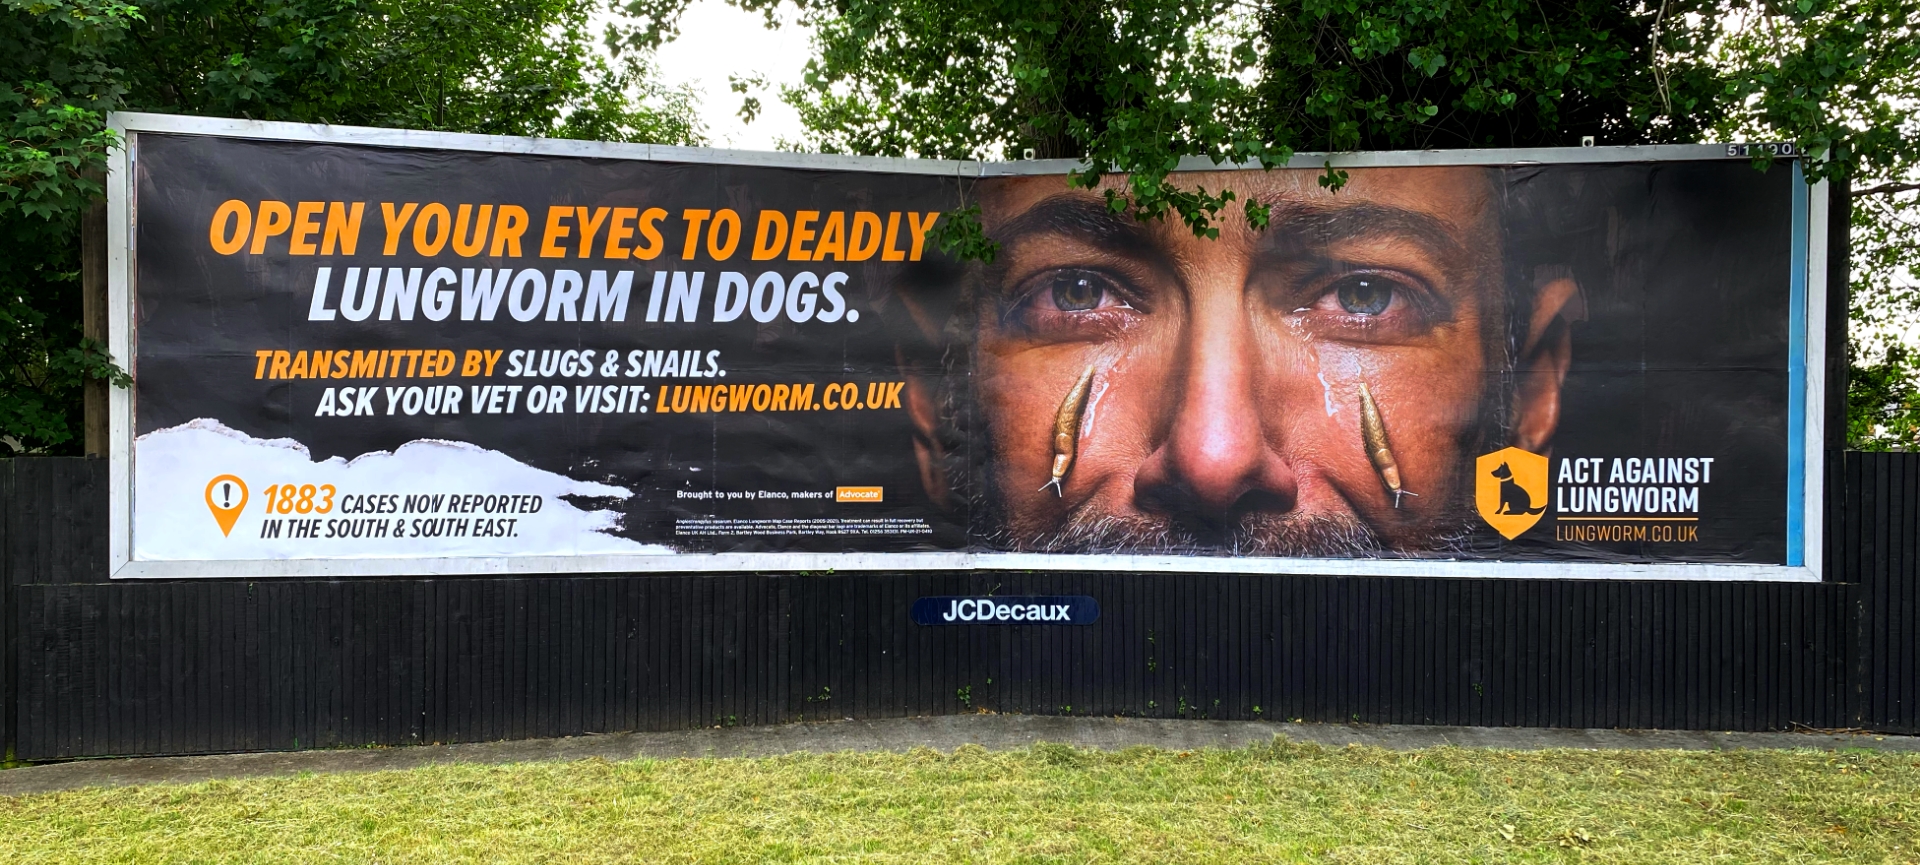 act against lungworm outdoor billboard